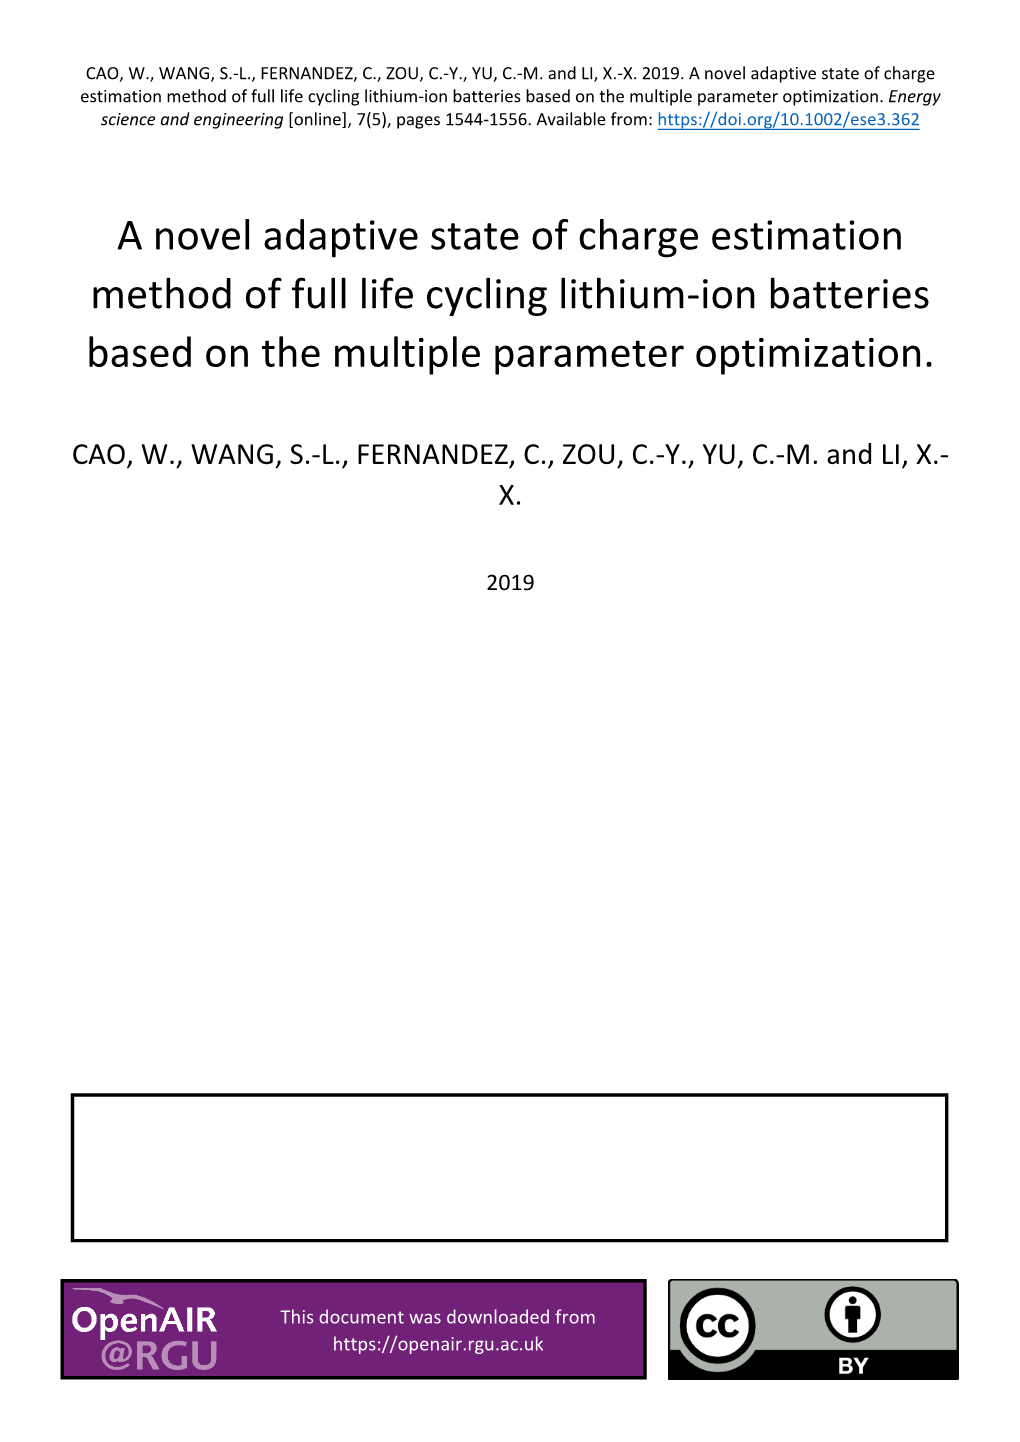 A Novel Adaptive State of Charge Estimation Method of Full Life Cycling Lithium-Ion Batteries Based on the Multiple Parameter Optimization